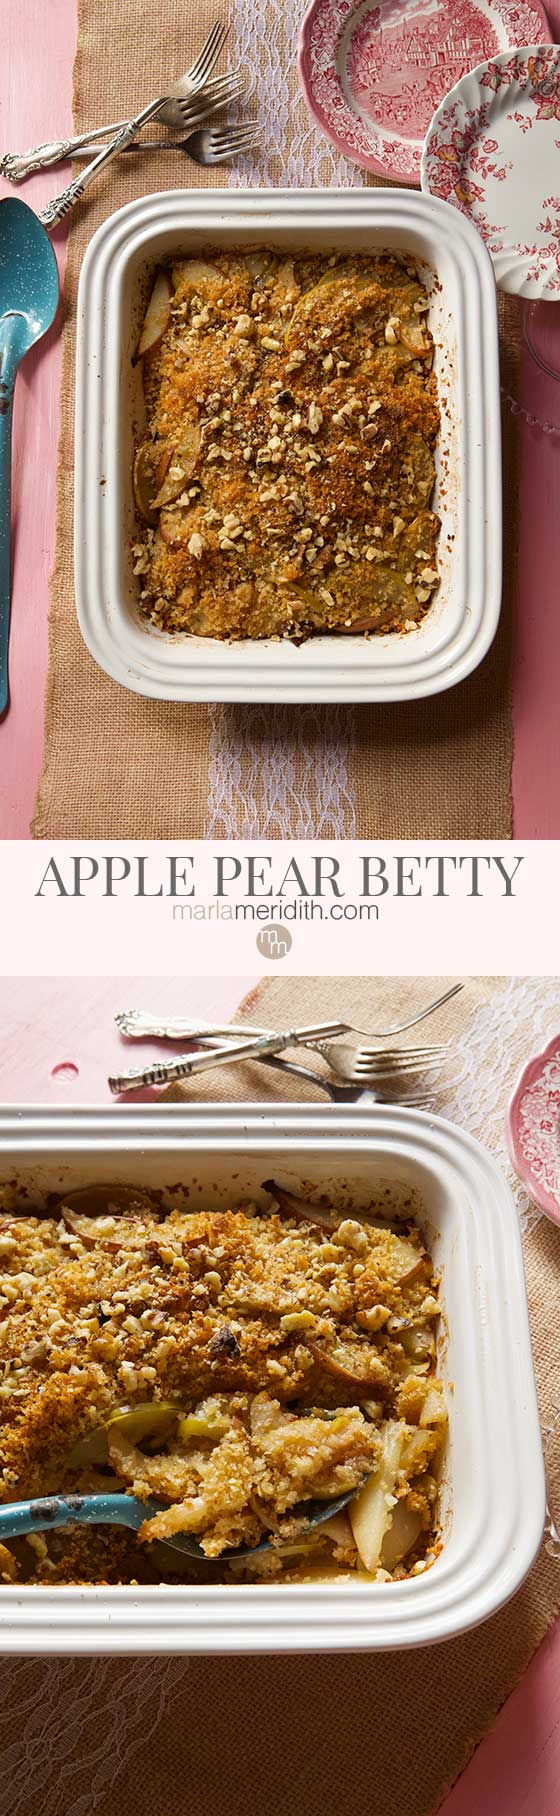 We love this fruit filled apple Pear Betty recipe, an irresistible rustic dessert that's great for holiday entertaining. Comes together quickly! MarlaMeridith.com 